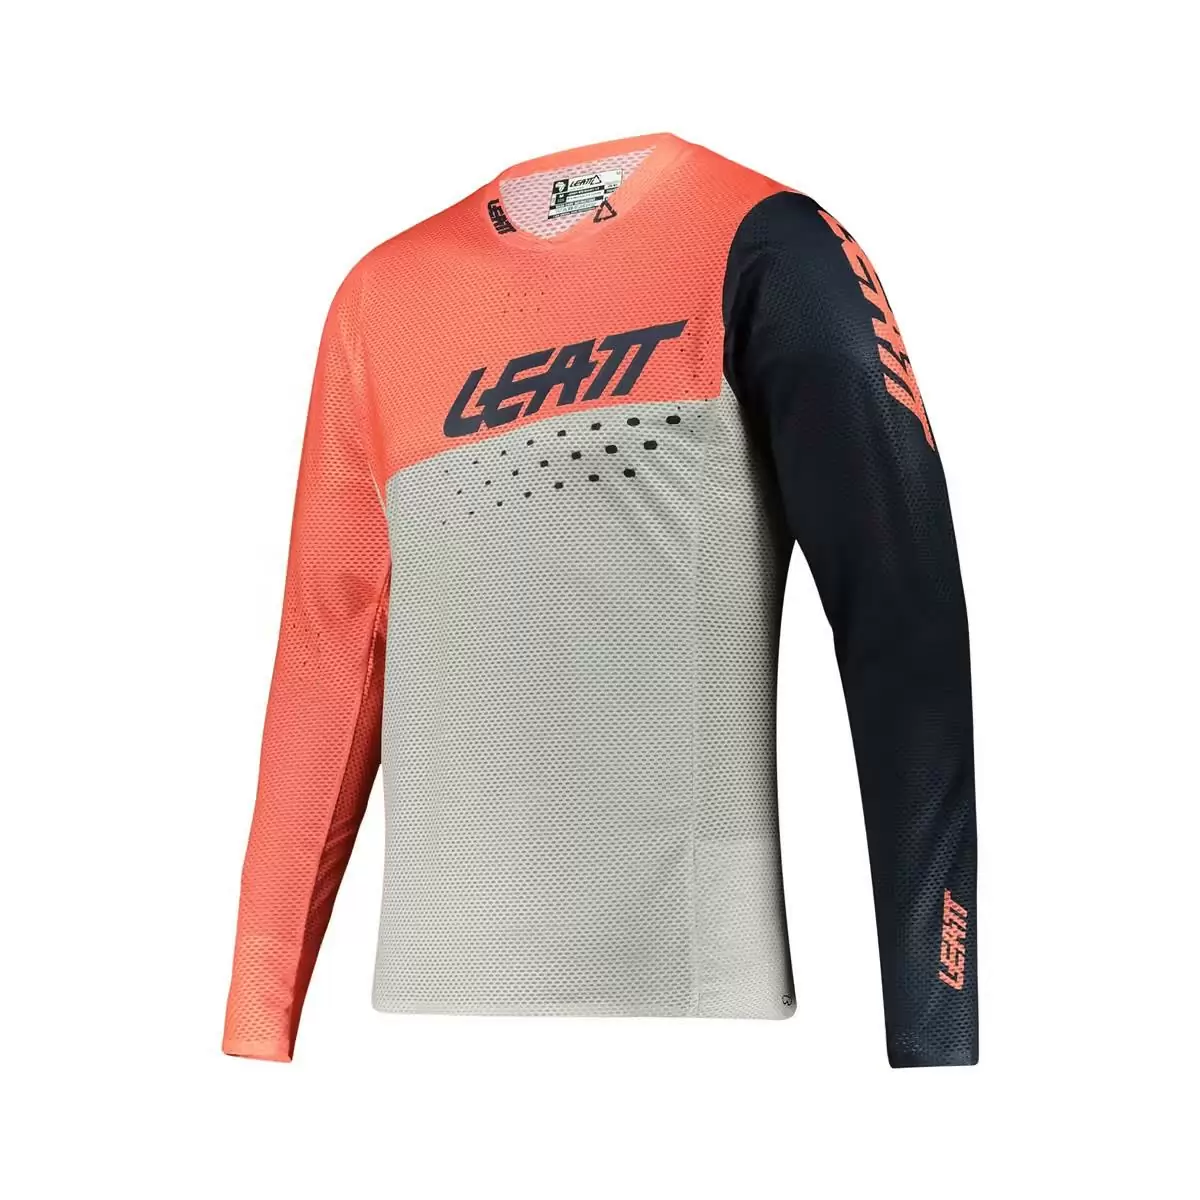 Maillot Manches Longues Mtb Gravity 4.0 Coral taille XXL - image